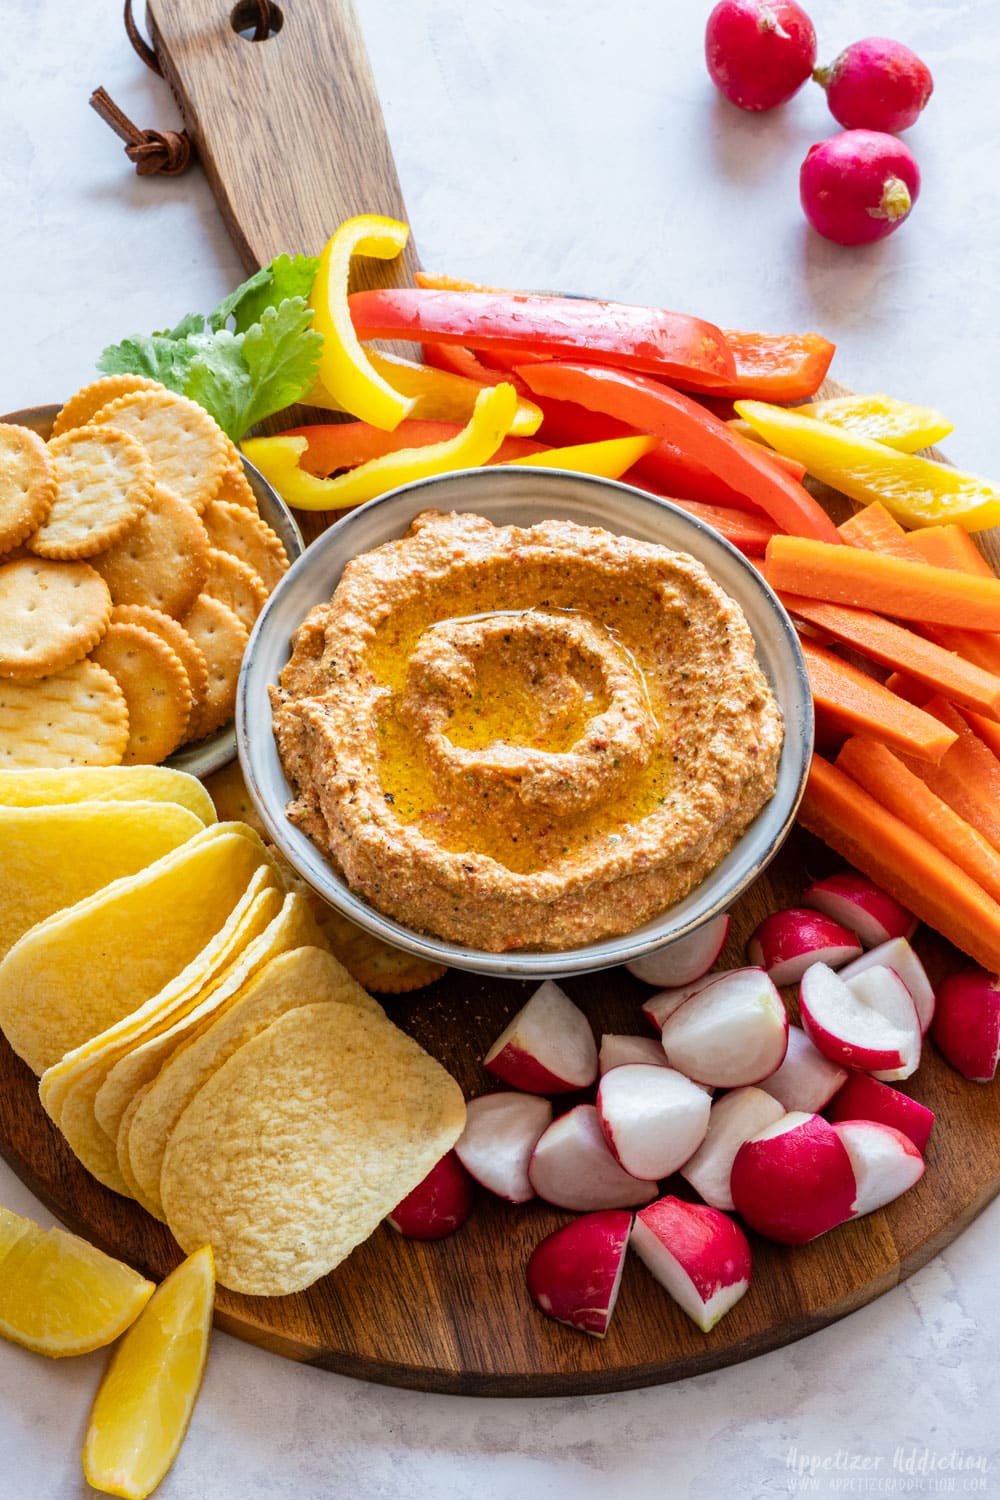 Platter with homemade cottage cheese dip, colorful vegetables and crackers.